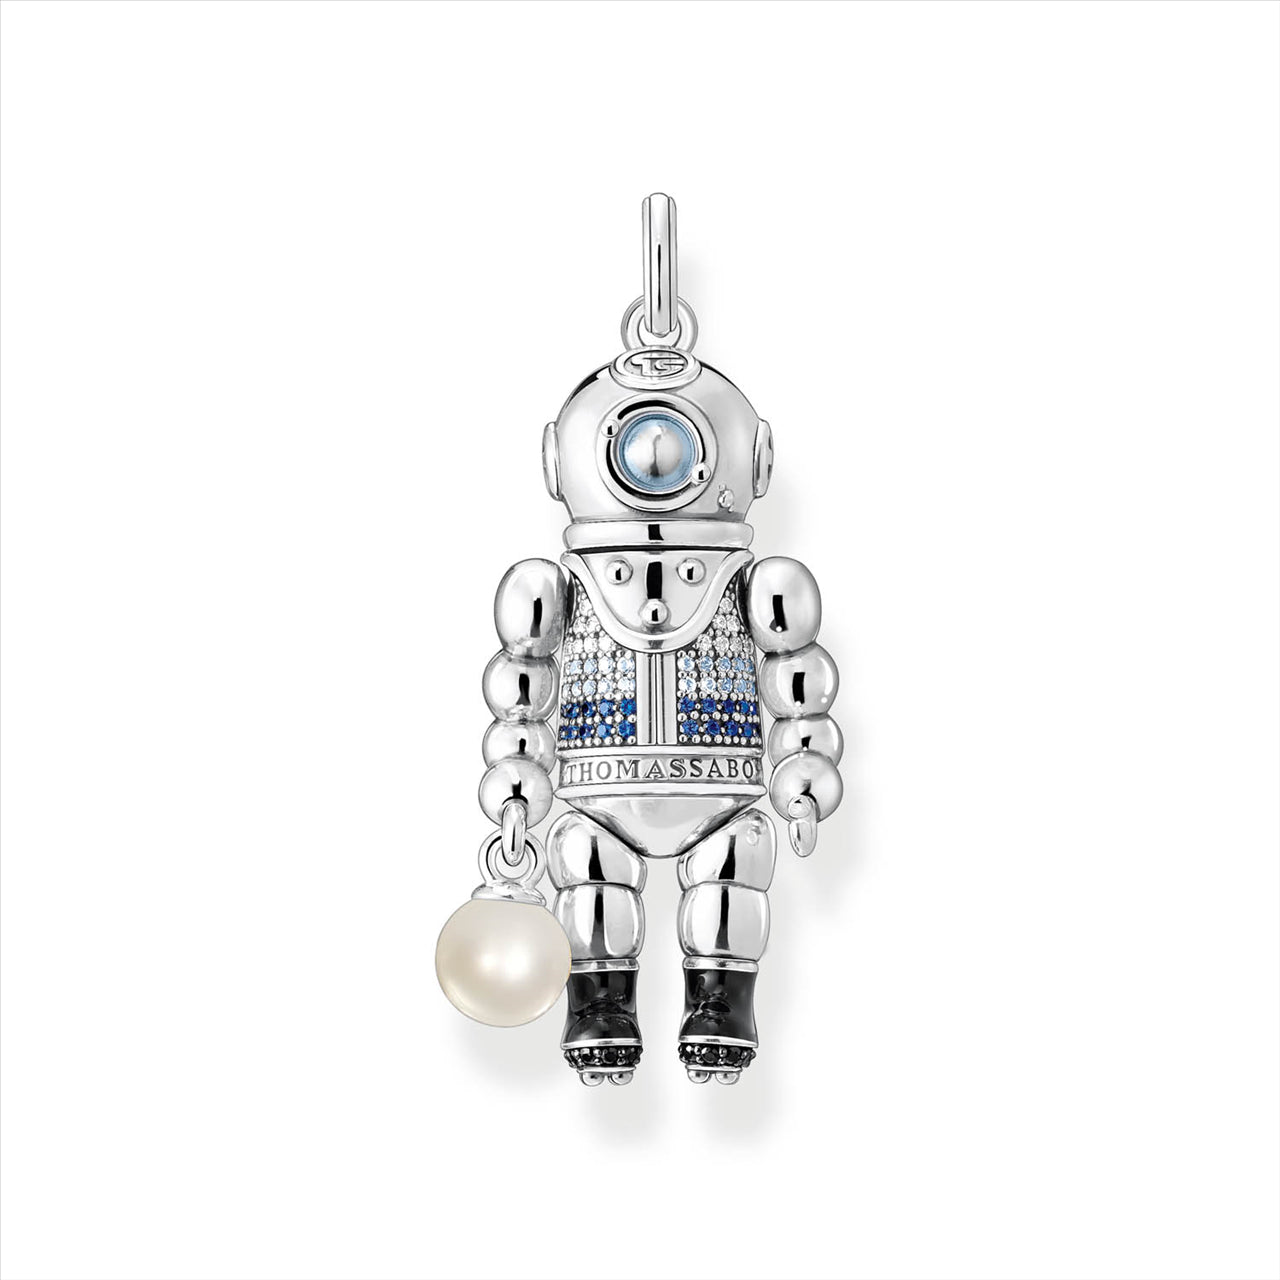 THOMAS SABO Pendant Diver with Pearl and Blue Stones